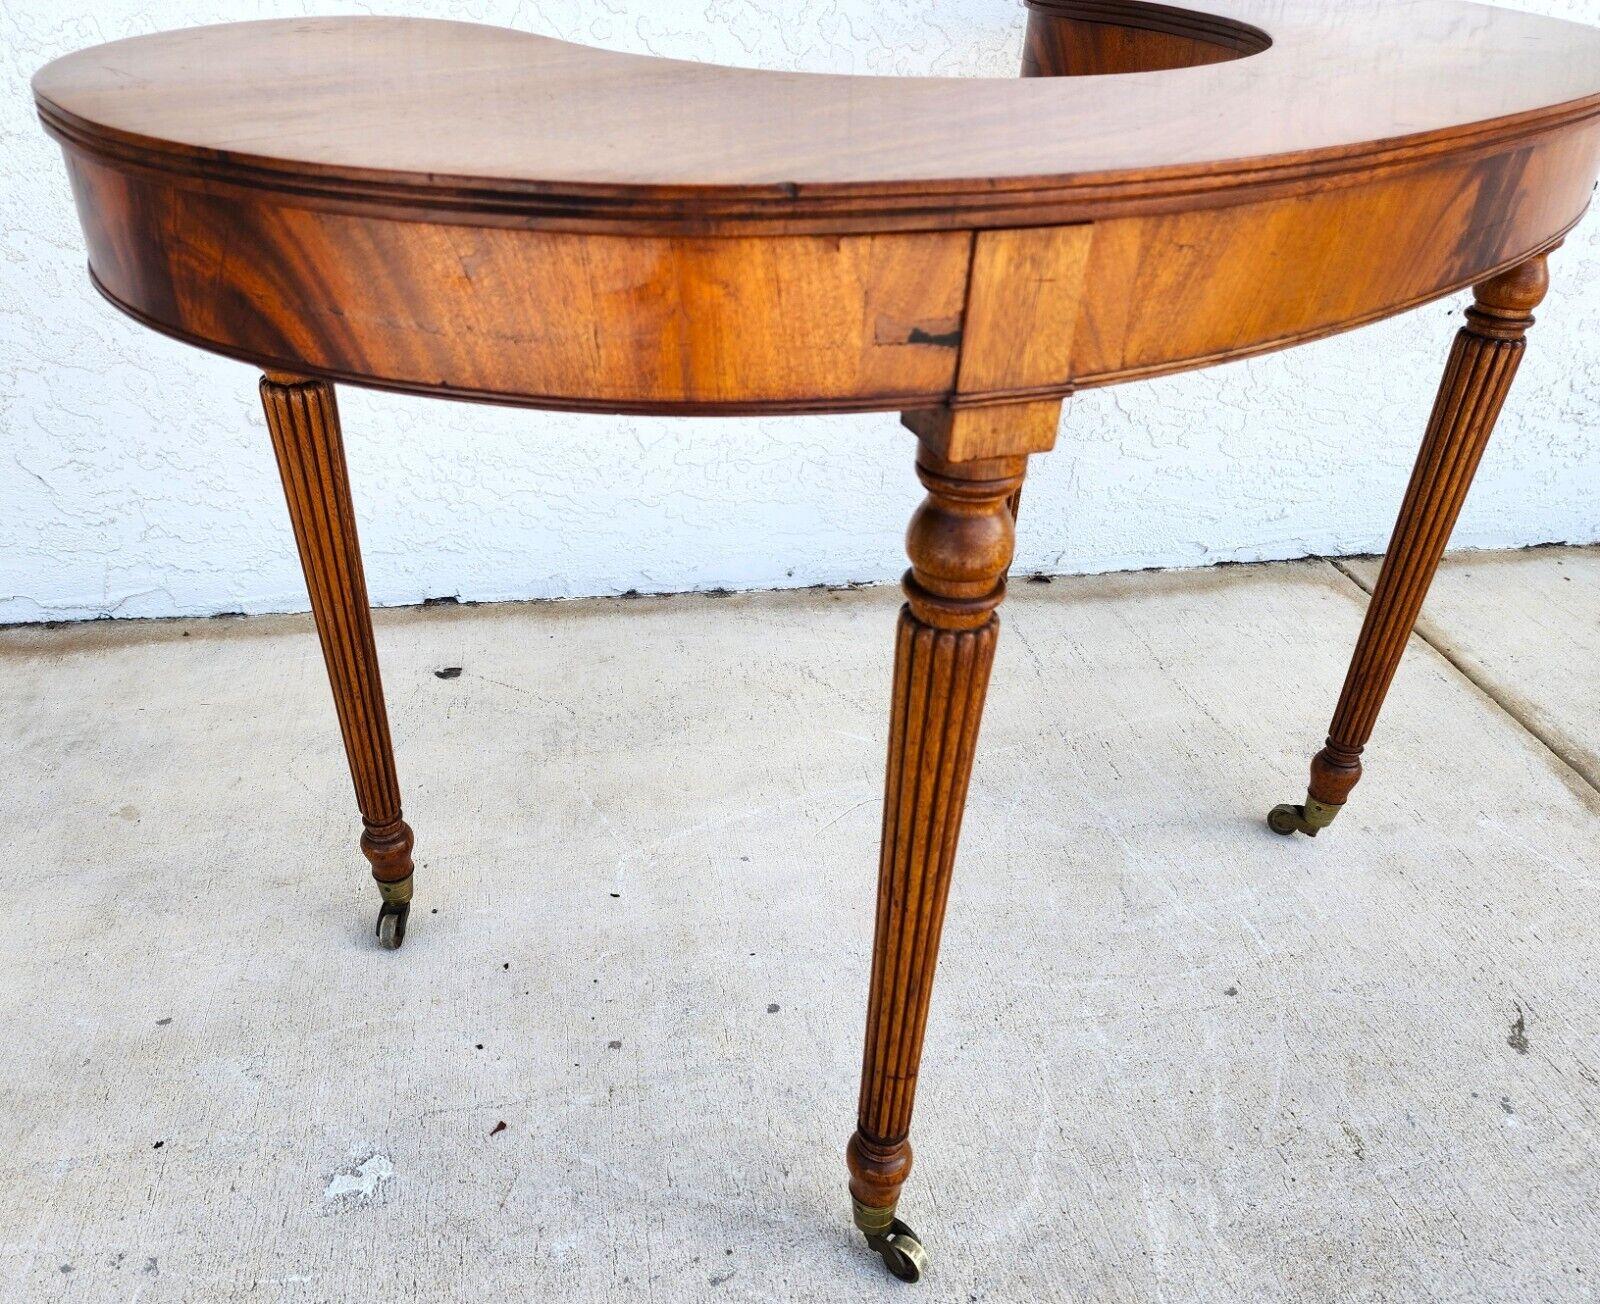 Wood Console Table Desk Midcentury Kidney Horseshoe Shape In Good Condition For Sale In Lake Worth, FL